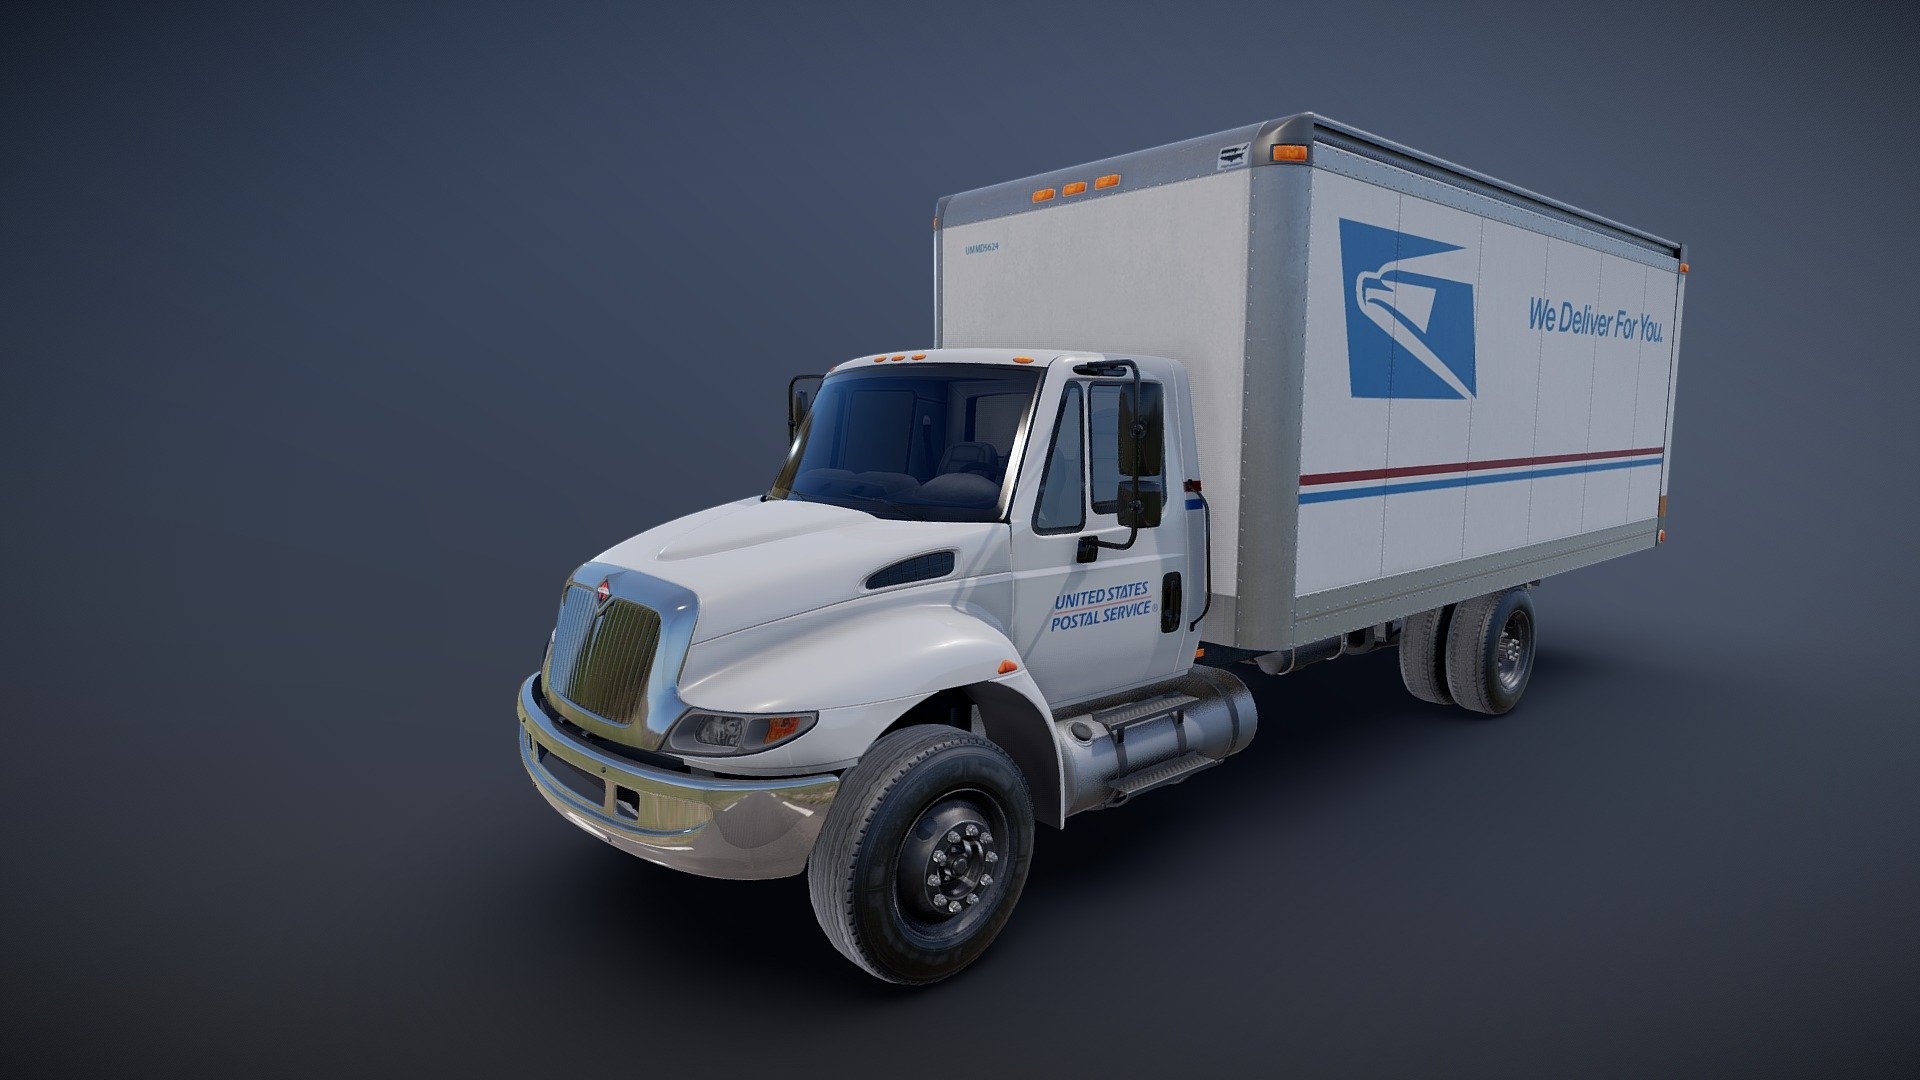 Mail box truck game ready model.

Full textured model with clean topology.

High accuracy exterior model

Different tires for rear and front wheels.

High detailed rims and tires, with PBR maps(Base_Color/Metallic/Normal/Roughness.png2048x2048 )

Model ready for real-time apps, games, virtual reality and augmented reality.

Asset looks accuracy and realistic and become a good part of your project 3d model